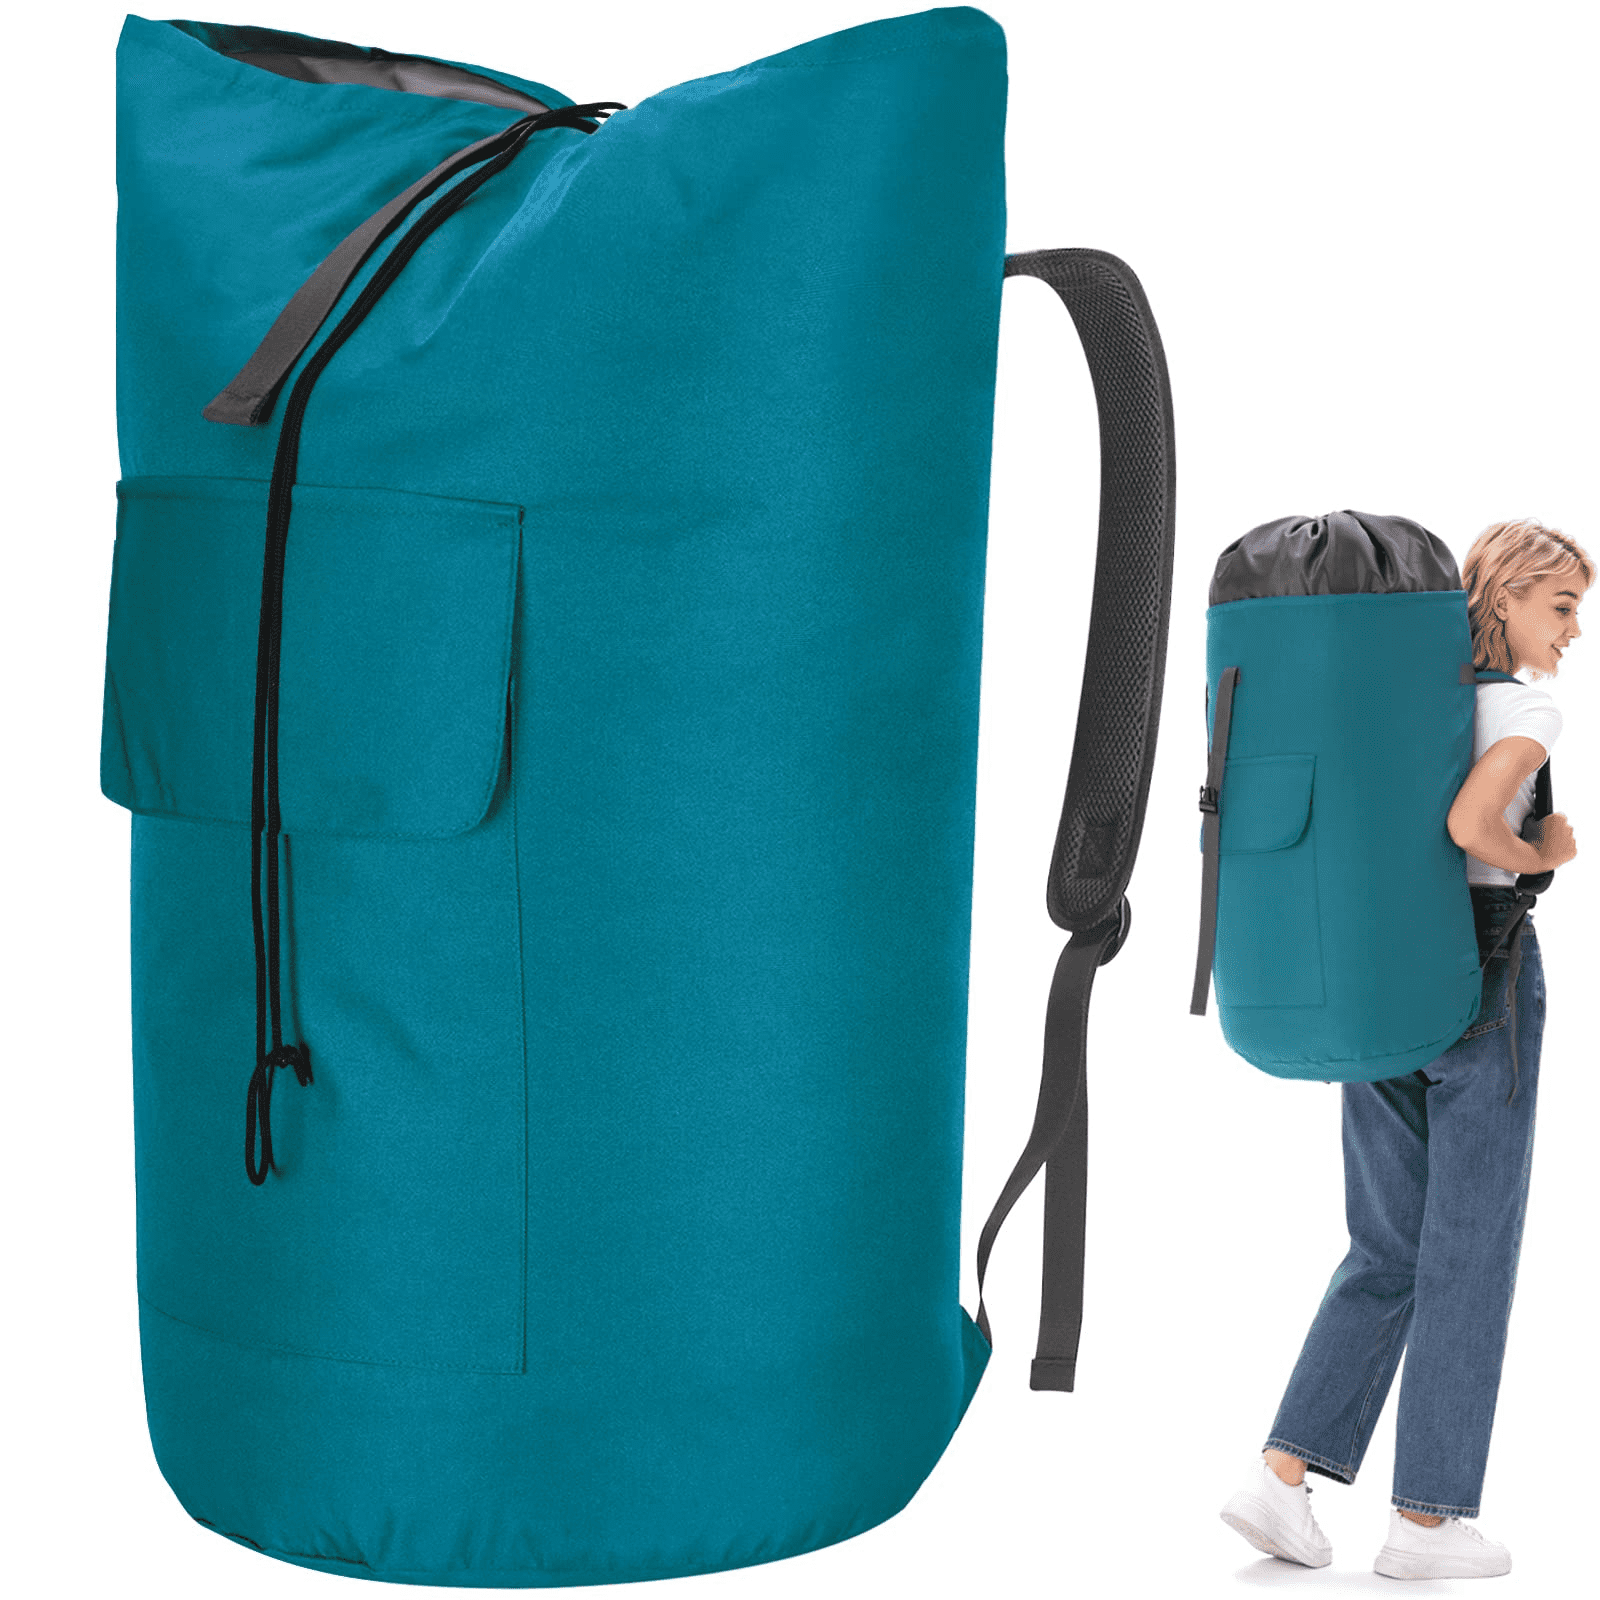 Laundry Bag Backpack For College Students Oxford Fabric - Walmart.com